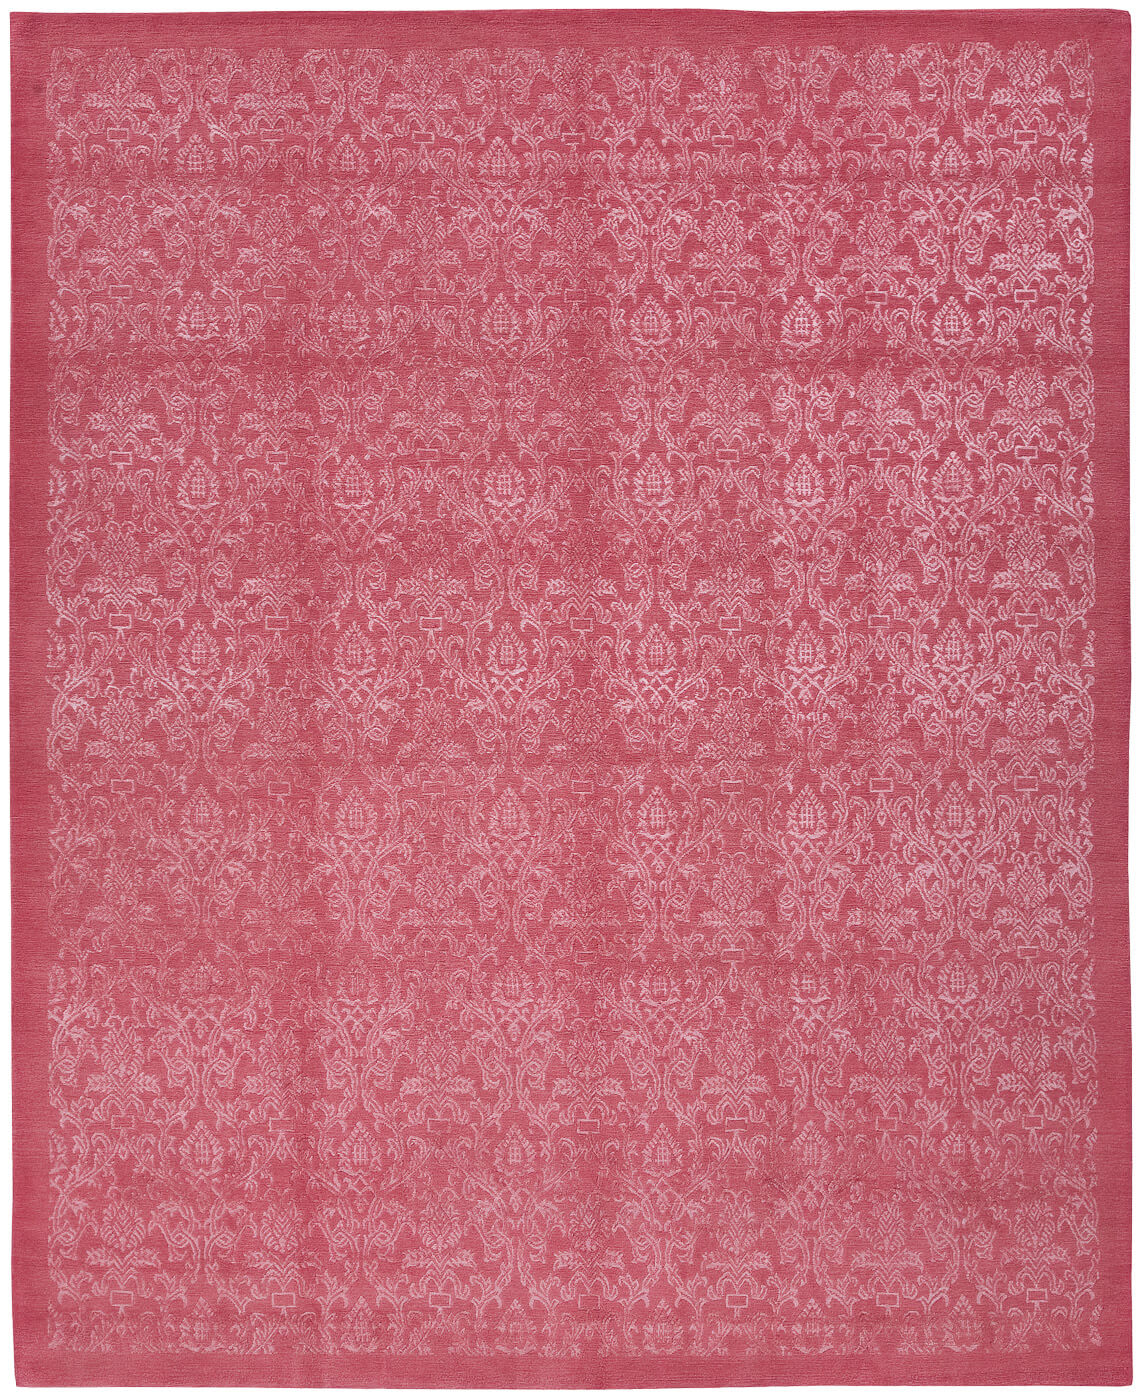 Roma Pink Luxury Hand-woven Rug ☞ Size: 200 x 300 cm